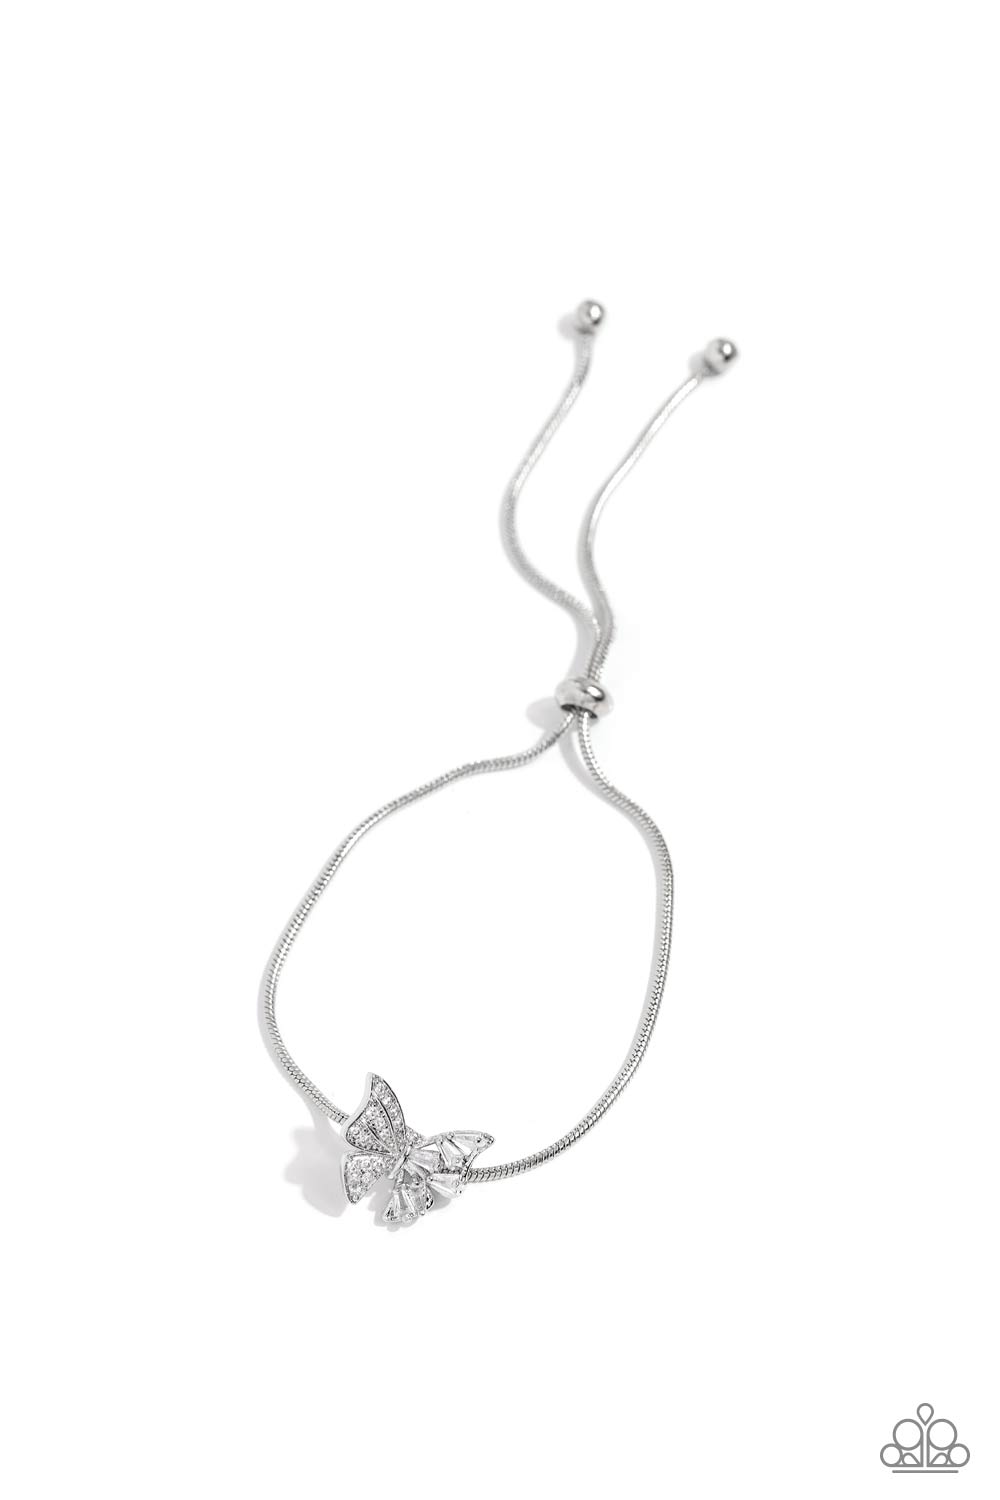 Adjustable Allure White Rhinestone Butterfly Bracelet - Paparazzi Accessories- lightbox - CarasShop.com - $5 Jewelry by Cara Jewels